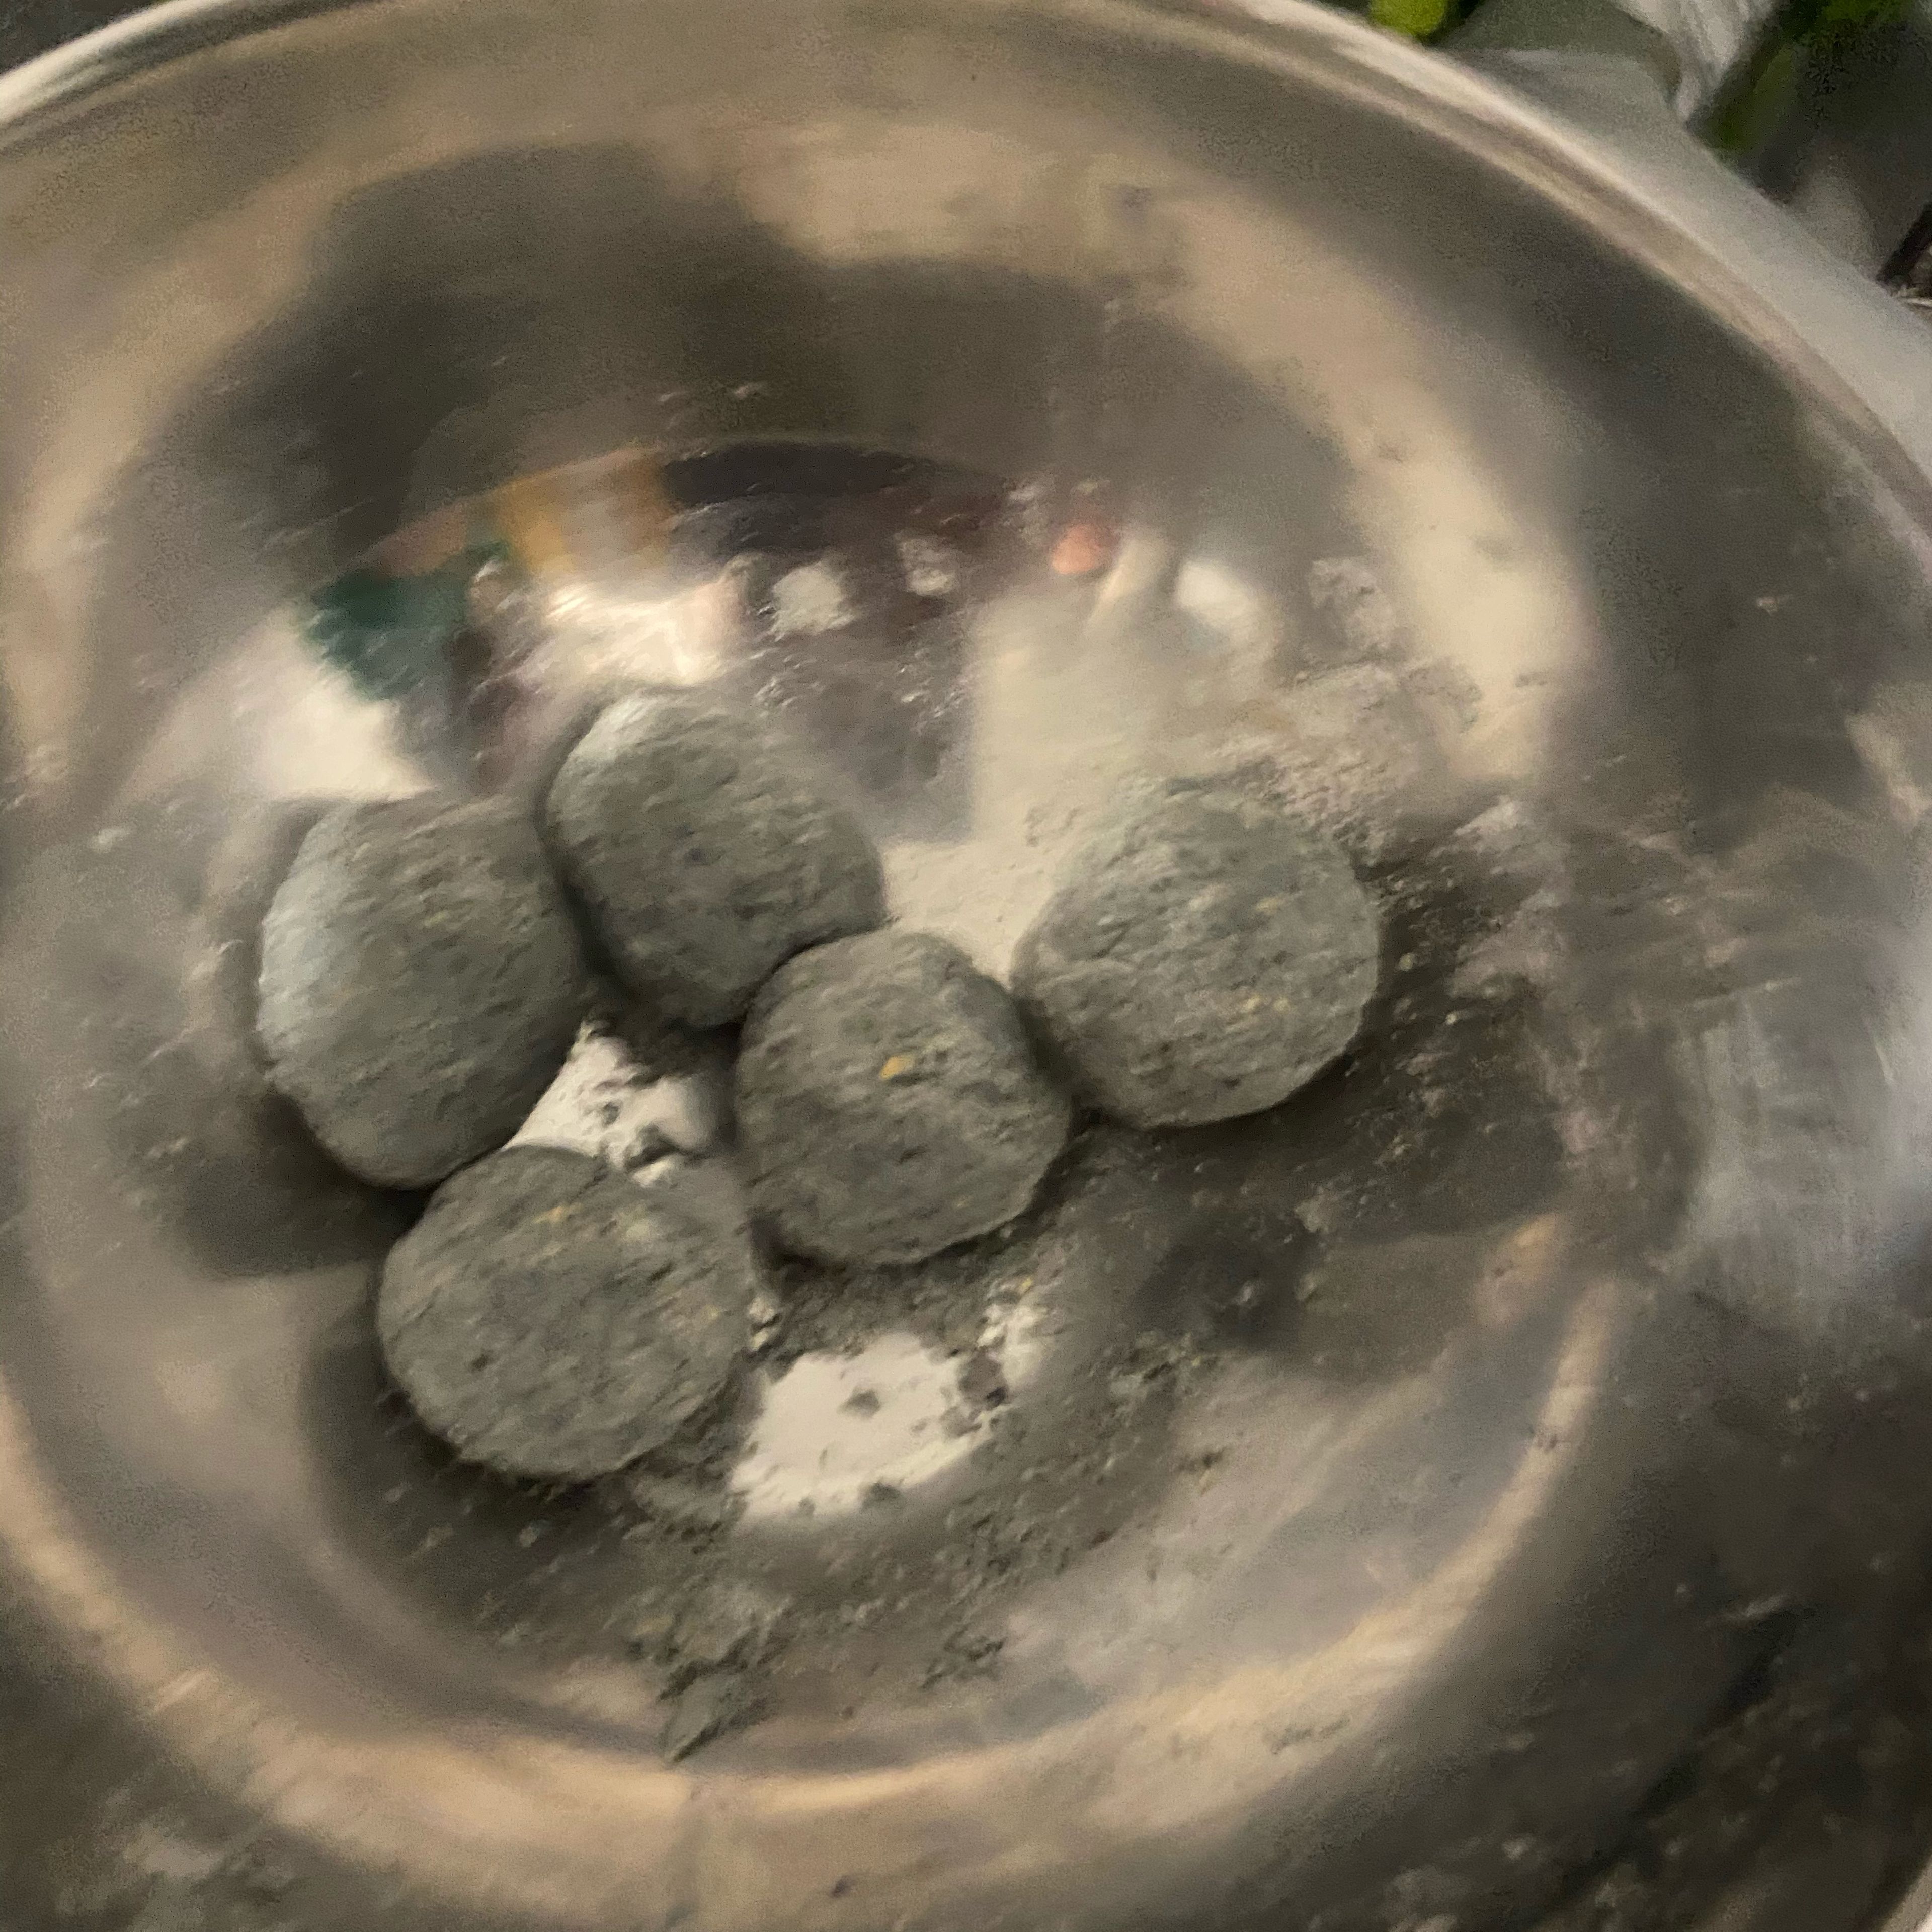 Meanwhile prepare your tortillas. I used 200g of blue-ish masa harina, 1 tsp salt and 75 mL of water. If you buy tortillas from the store, try to find fresh ones. ( This makes about 8-9 tortillas)